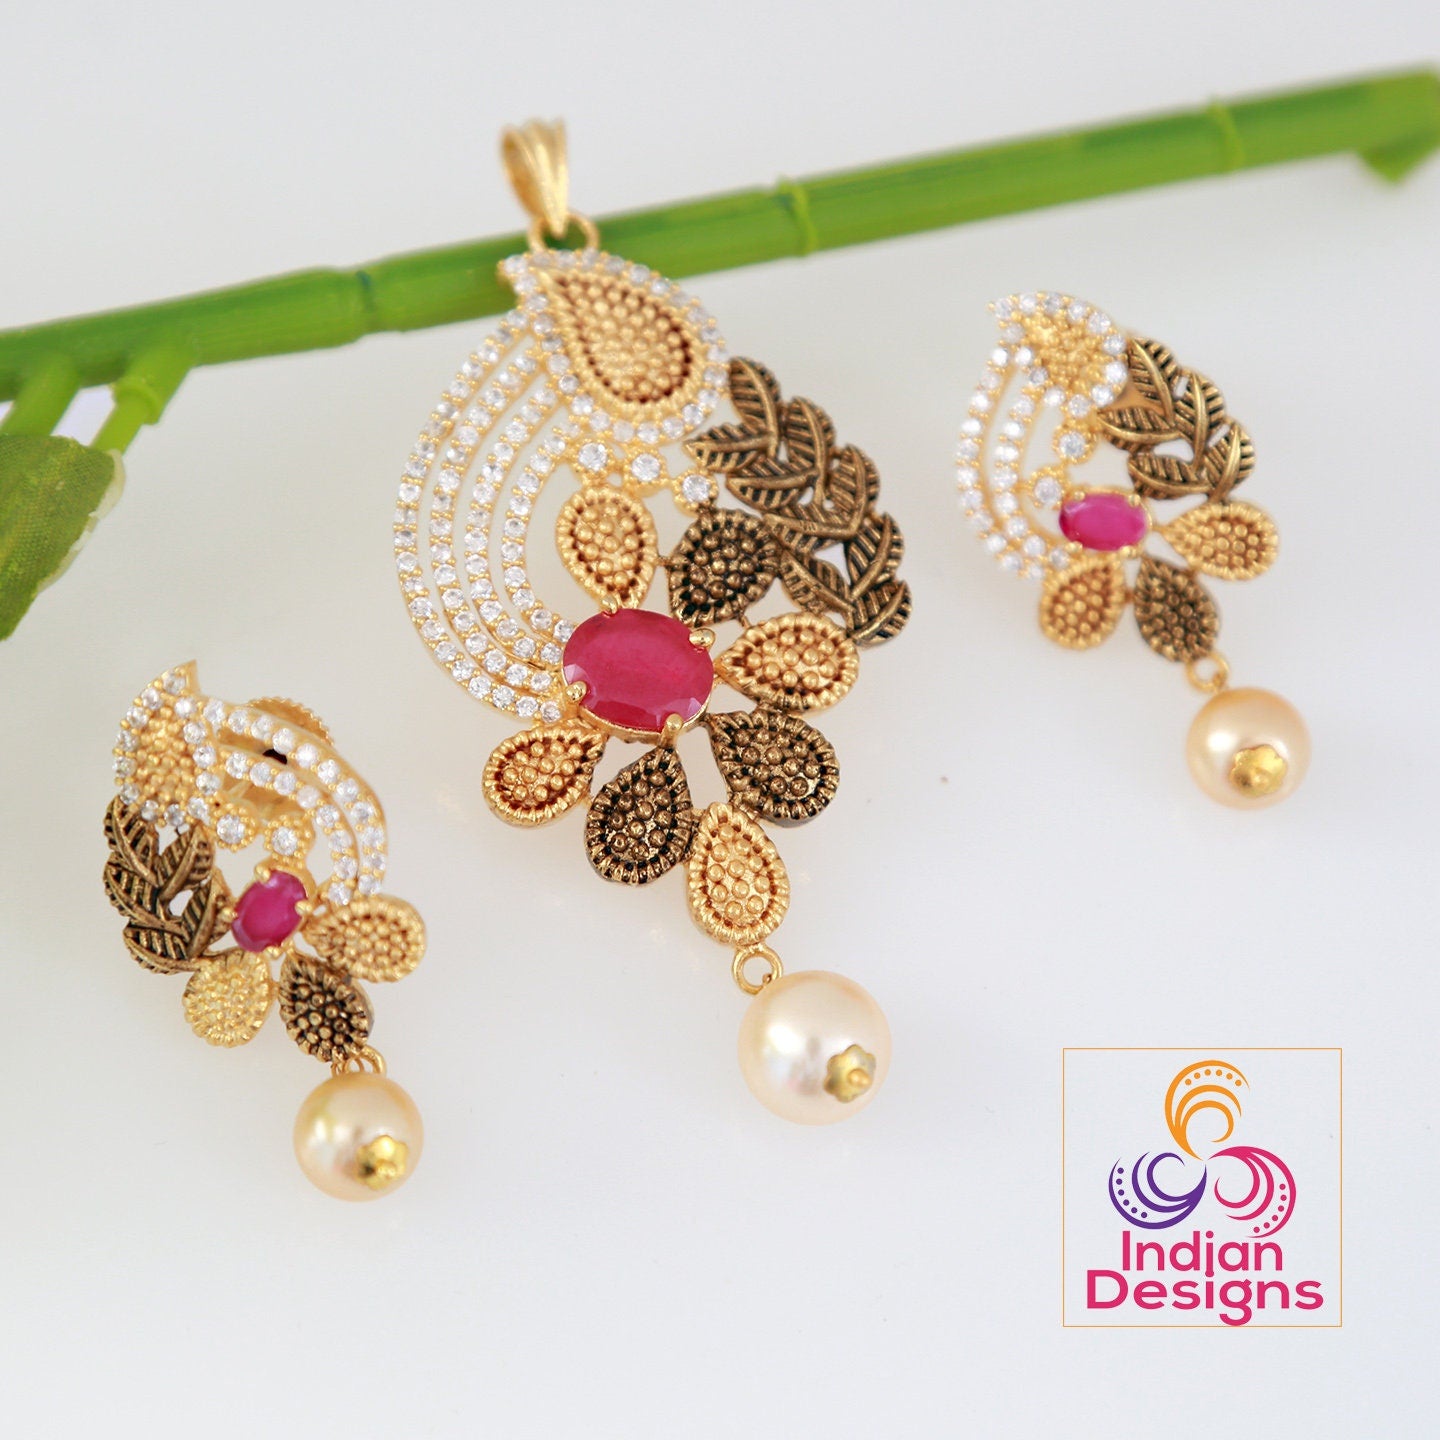 Floral art pendant | American Diamond Two tone gold Polish Pendant Set with Ruby and White Stones | Gold plated pendant set | Indian jewelry